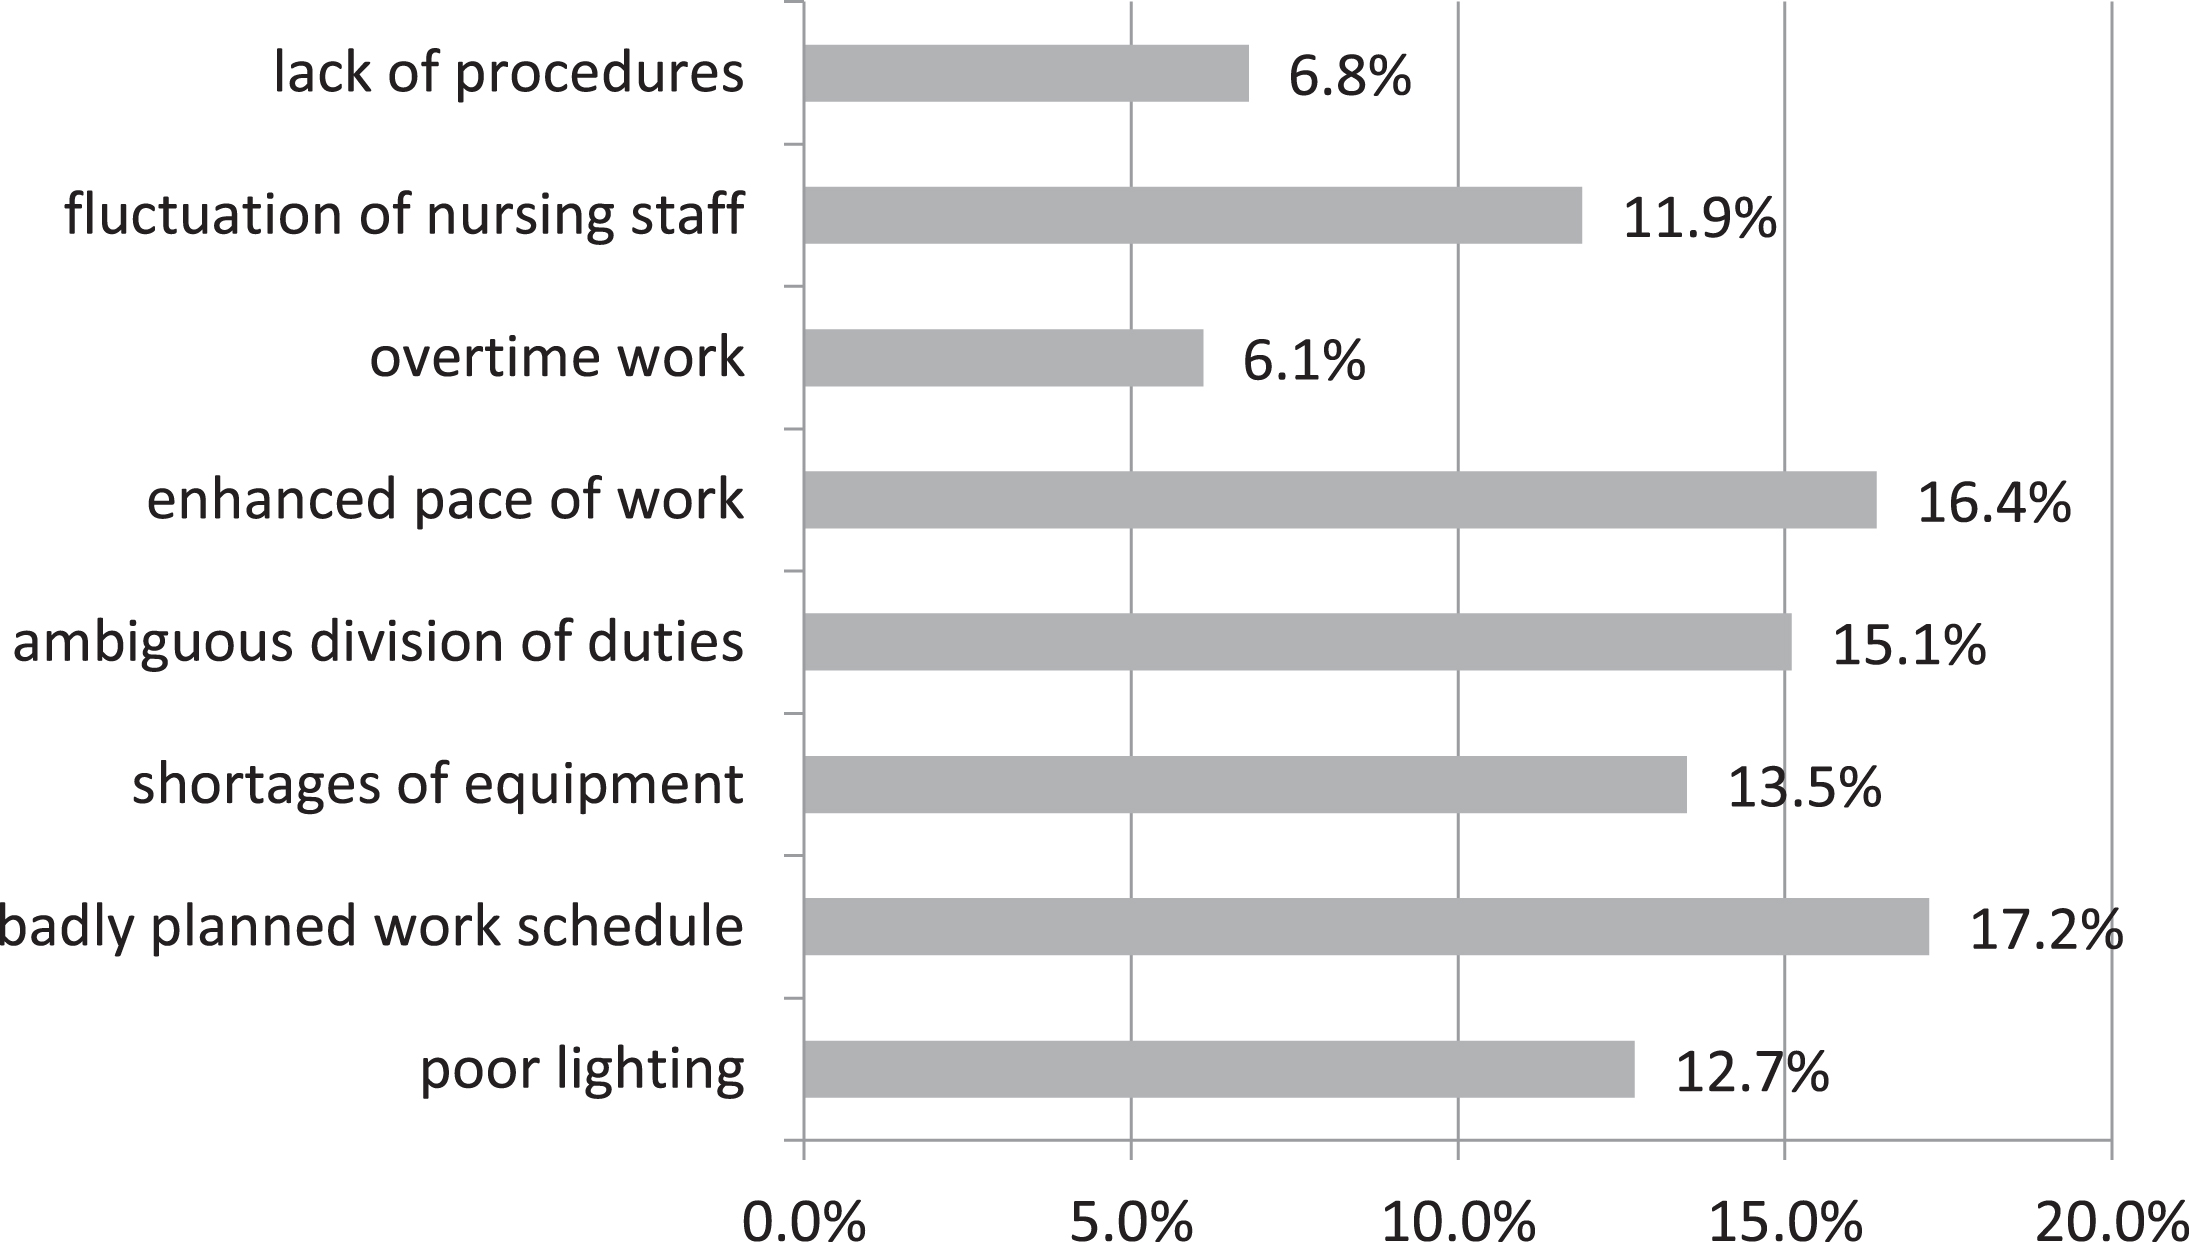 Most frequent organizational factors hindering shift work in a hospital ward according to respondents’ opinions.